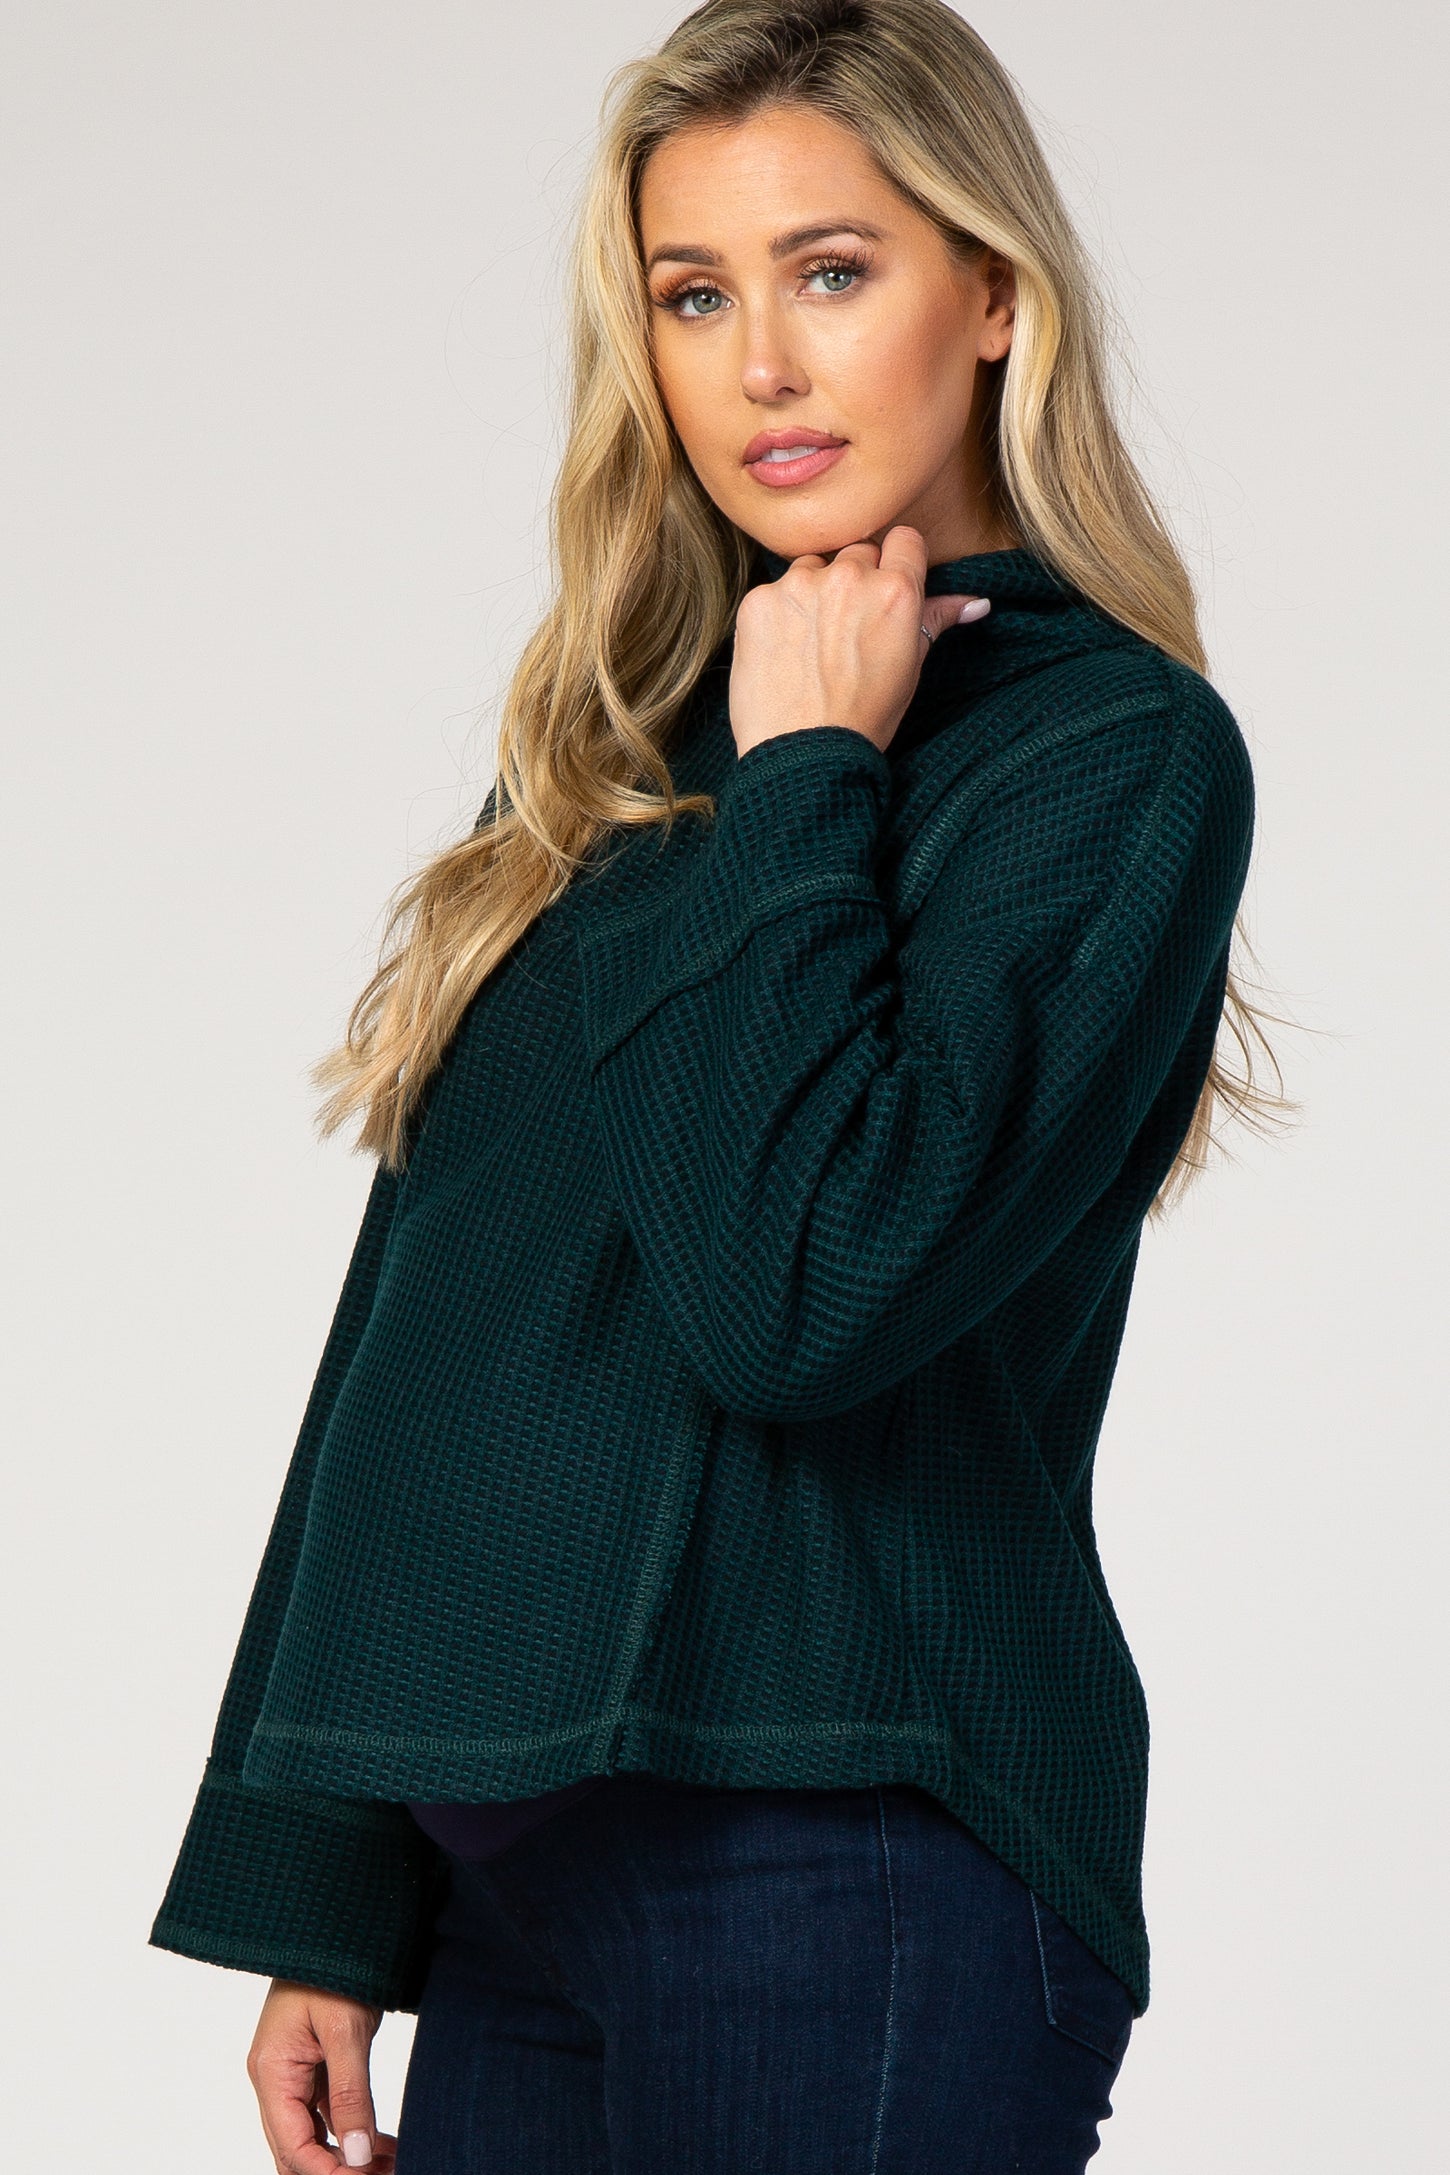 Green Long Sleeve Cowl Neck Maternity Top